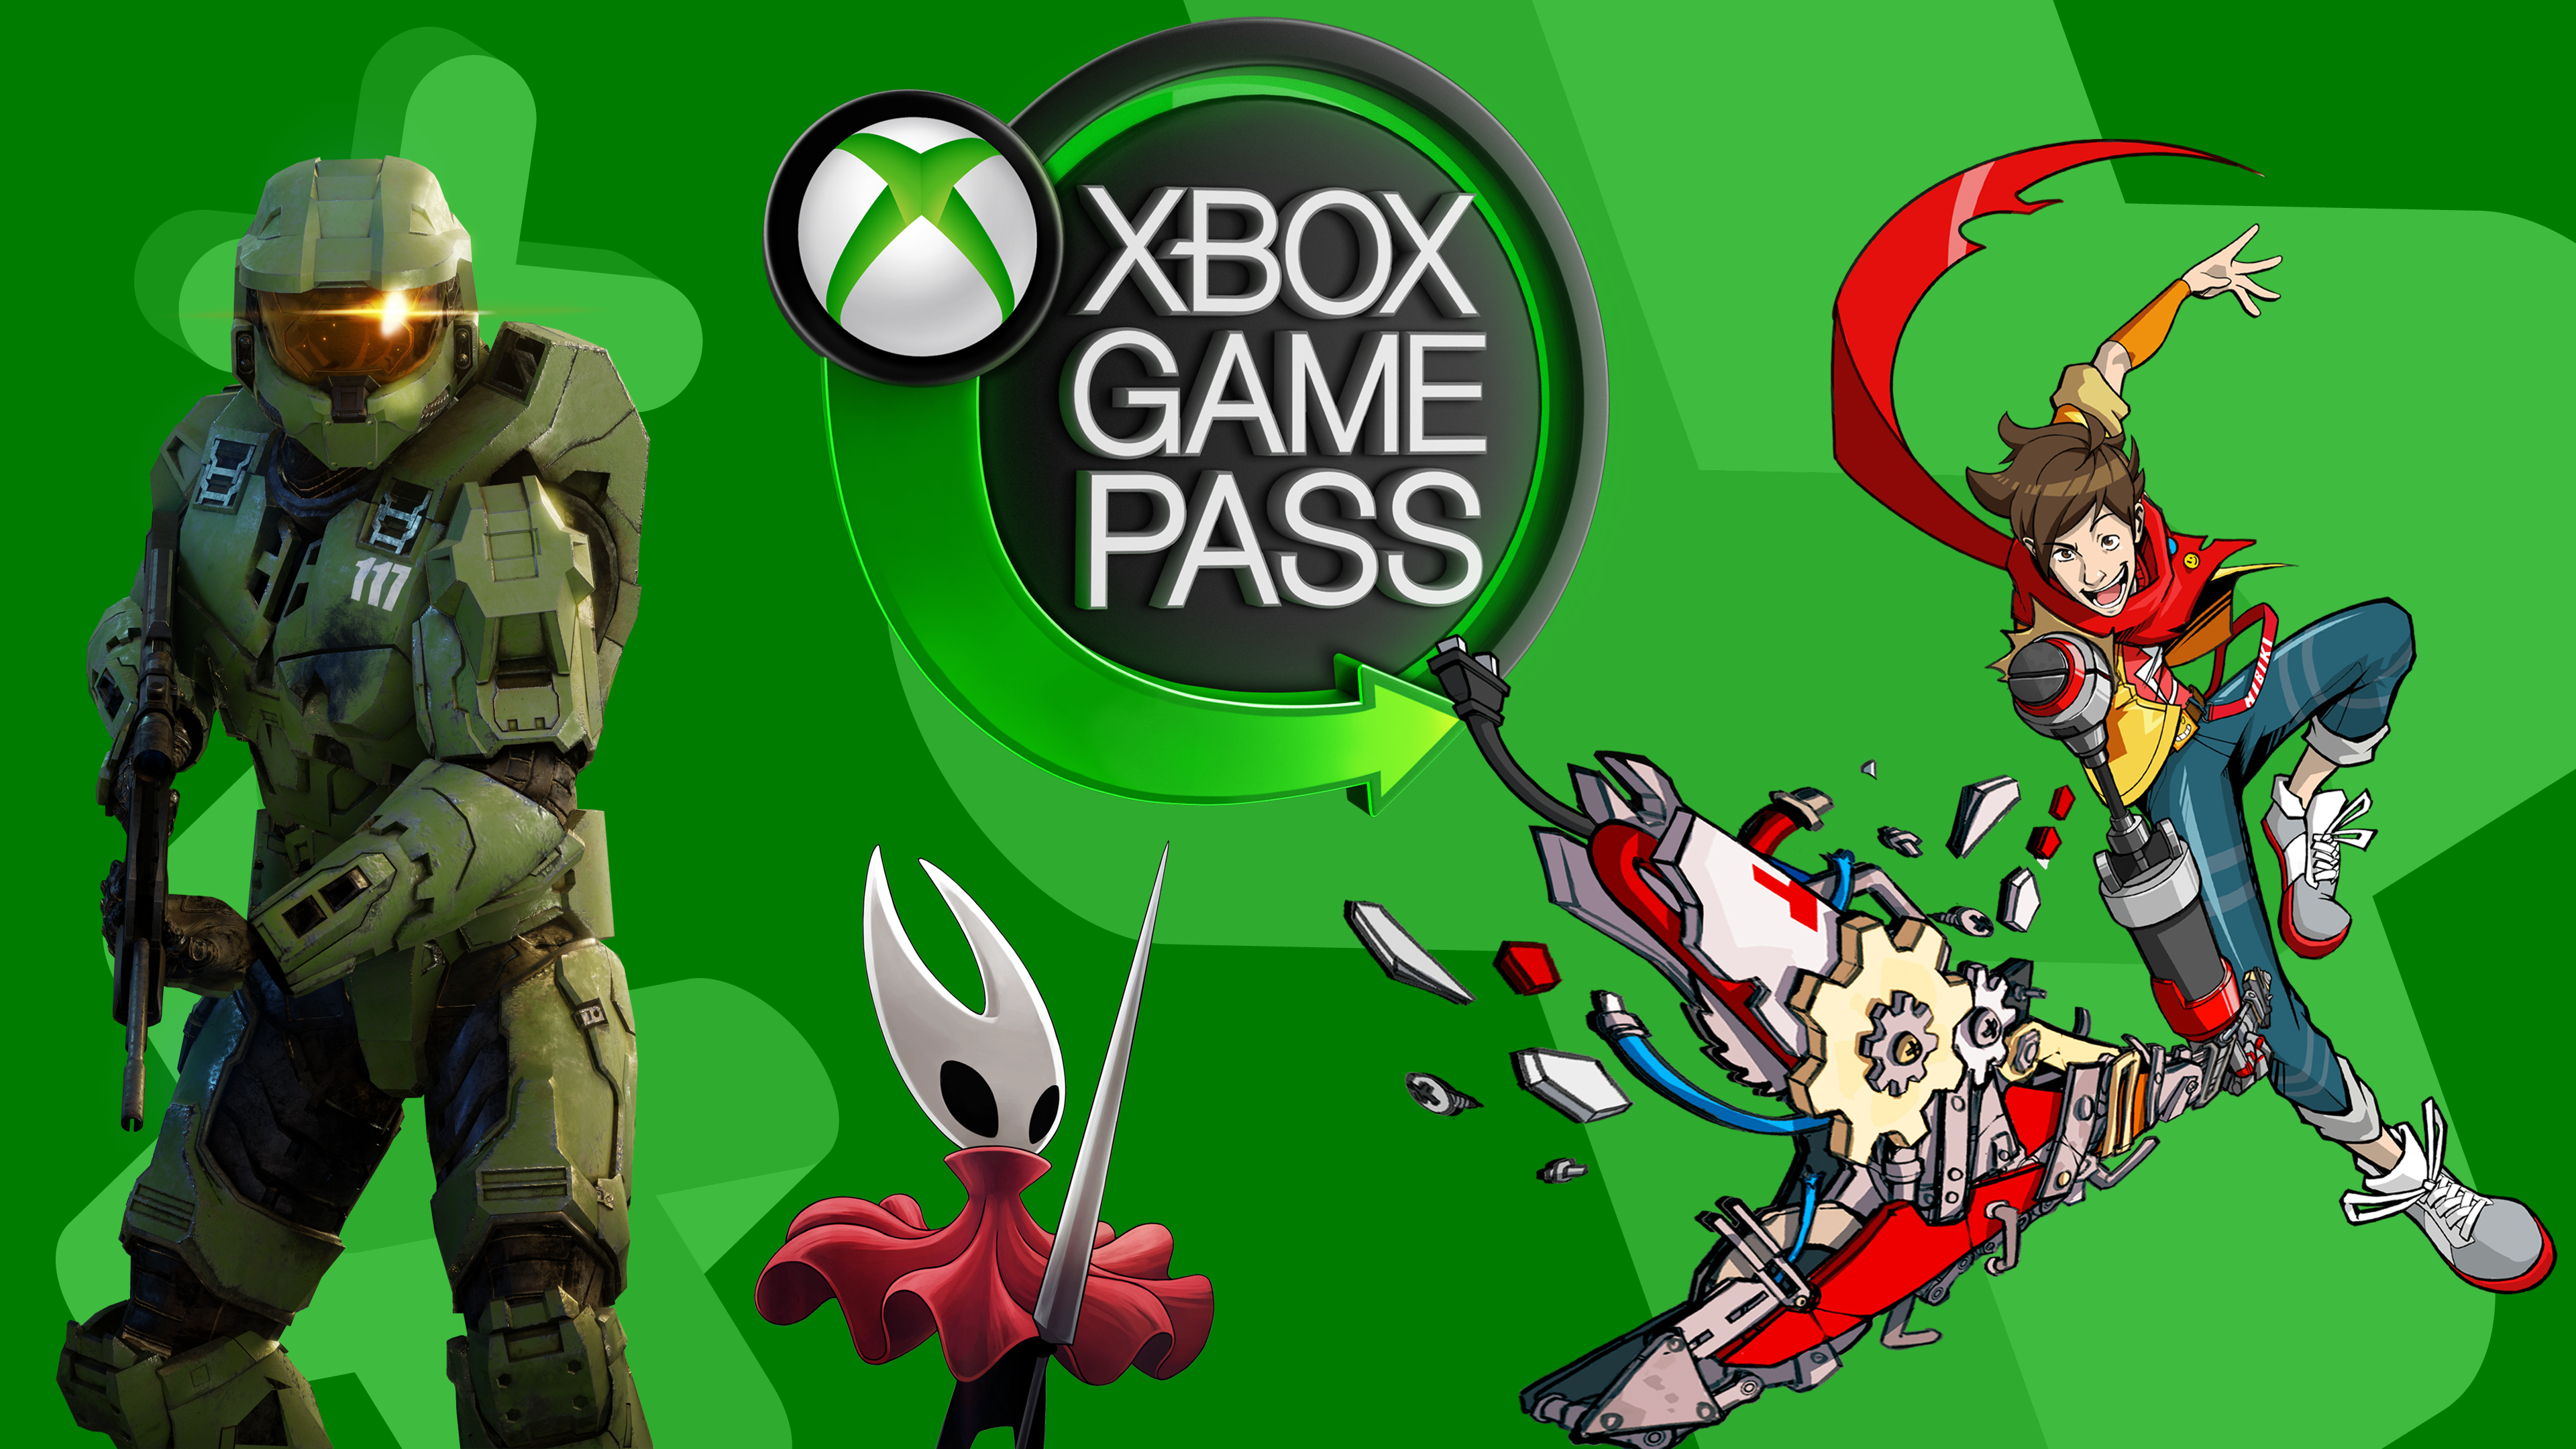 Monster Hunter Rise and Lego Star Wars are coming to Game Pass